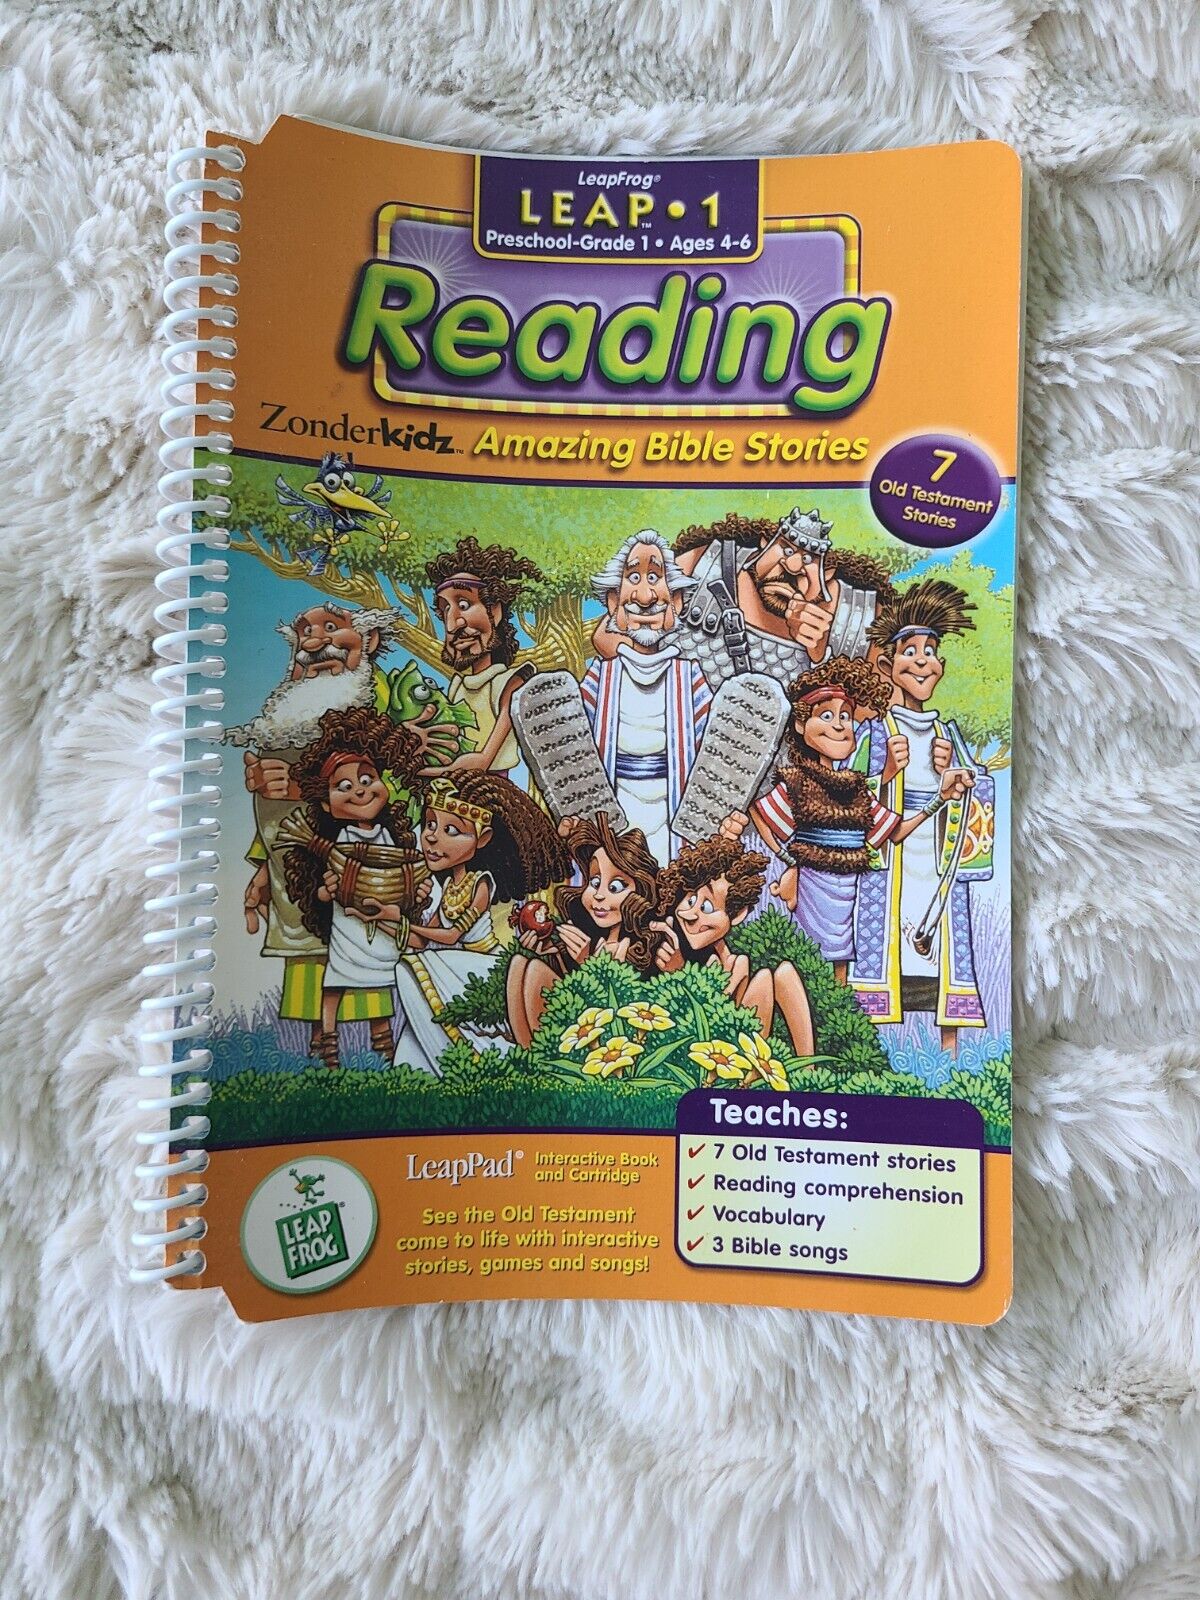 LeapFrog Leap 1 Reading: Amazing Bible Stories 7 Old Testament Stories